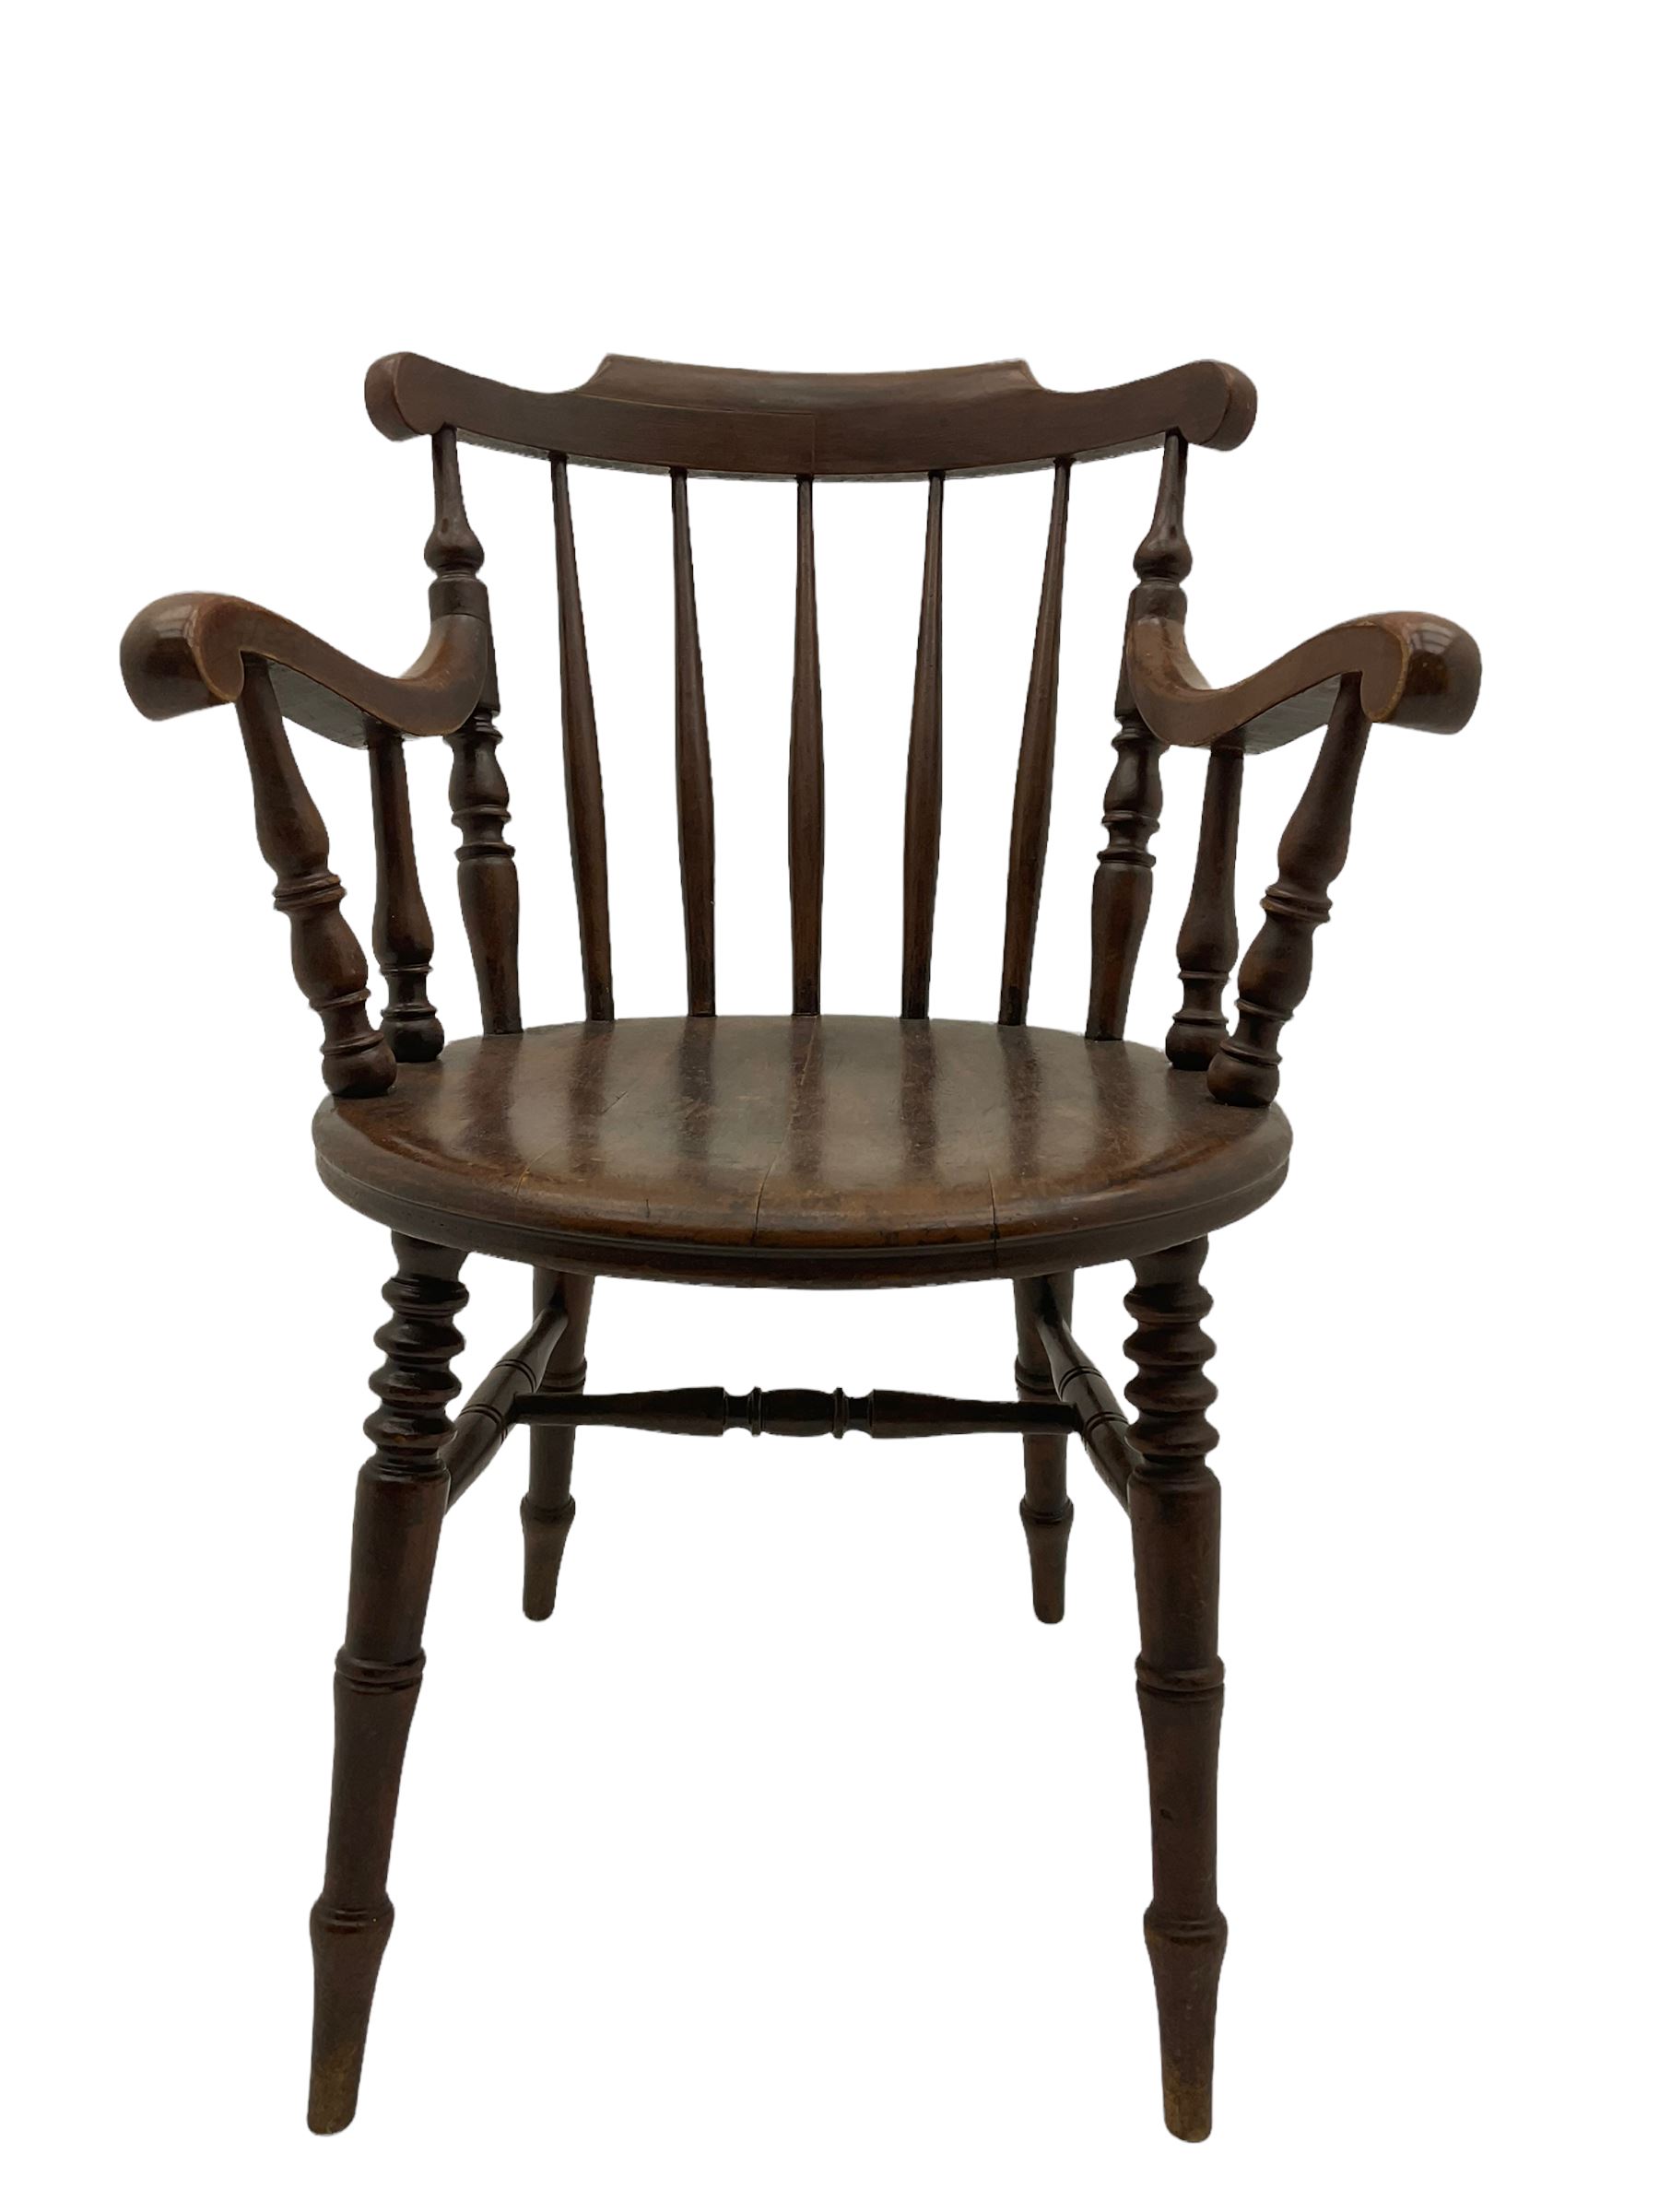 Late 19th century stained beech 'Penny' chair with "Ibex" label underneath